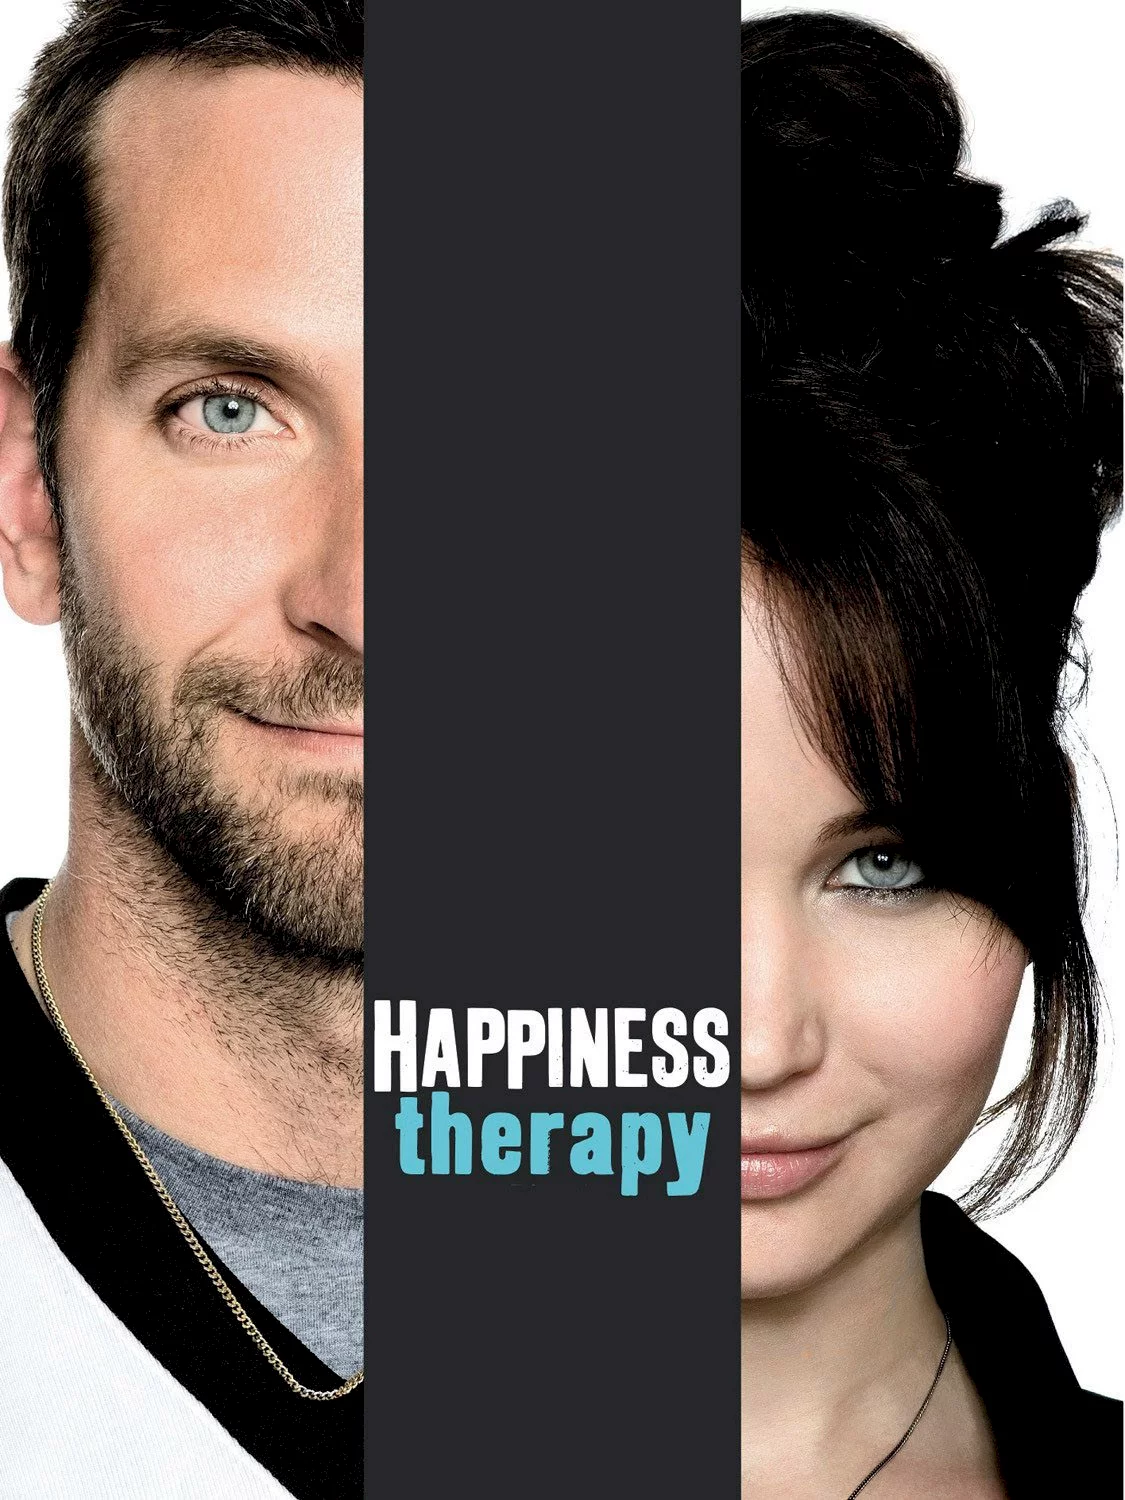 Photo du film : Happiness Therapy